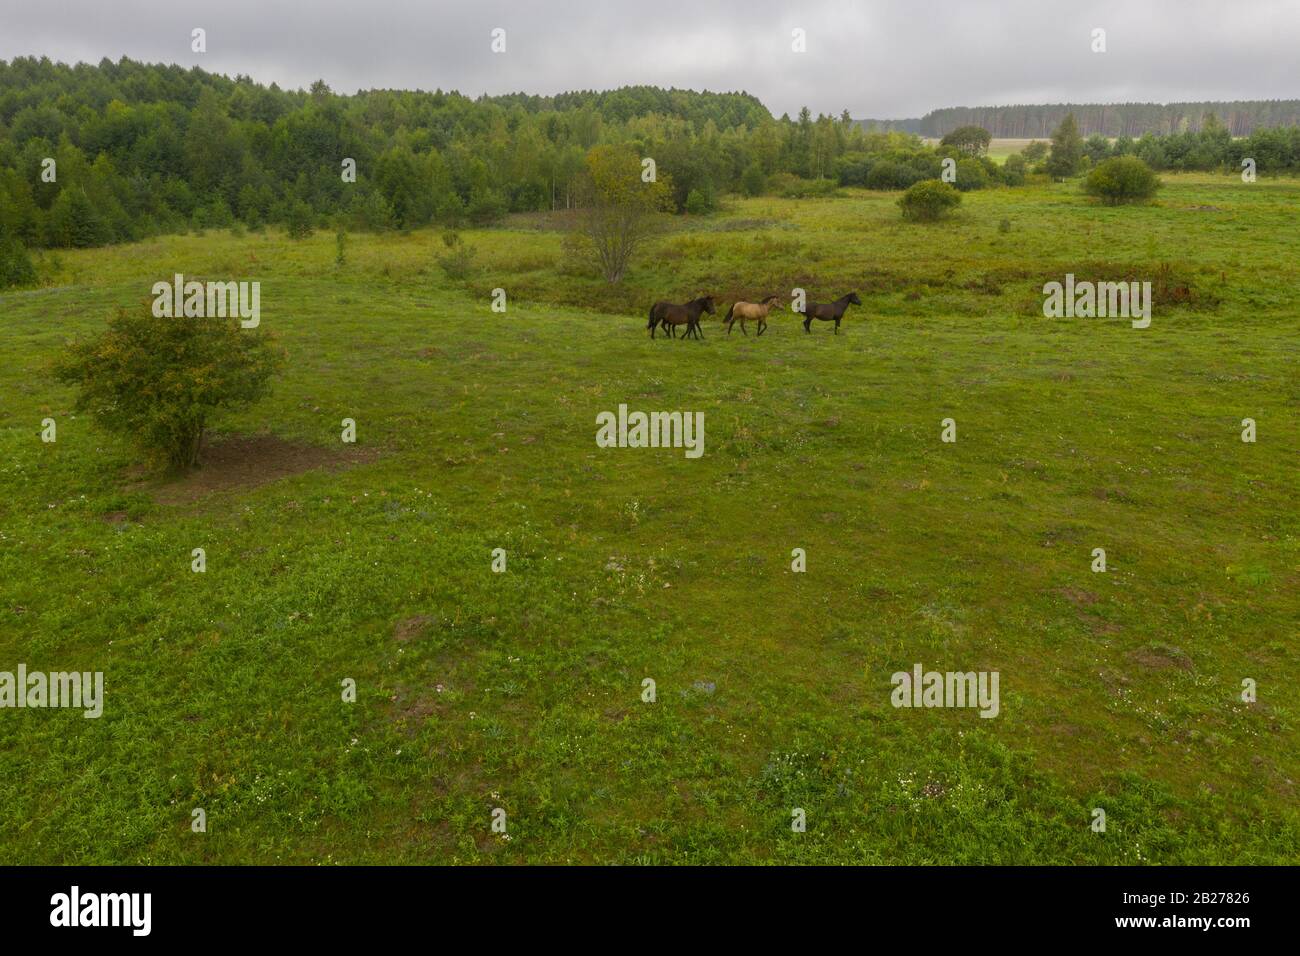 Drone point of view of horses grazing in meadow during cloudy summer day Stock Photo